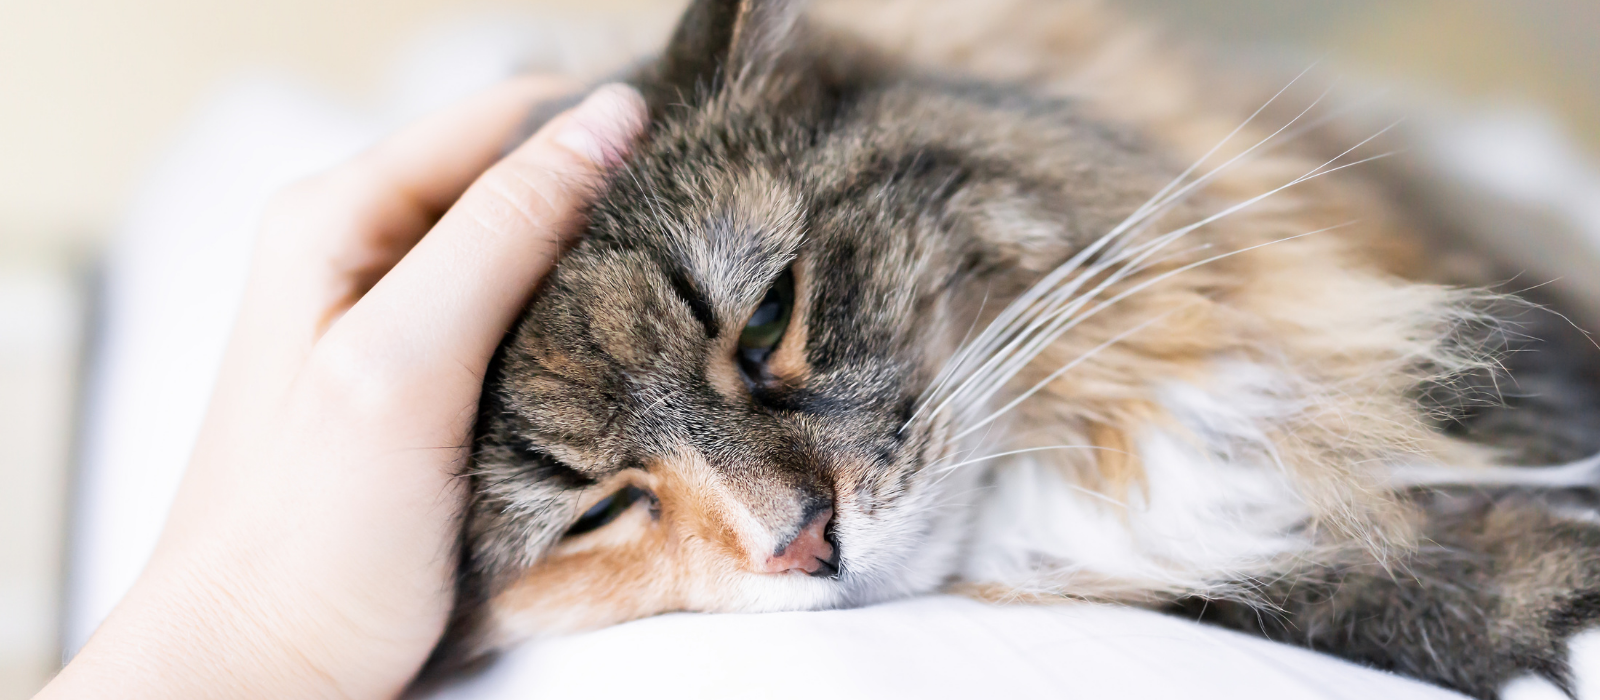 What We Can Do to Help With Feline UTIs